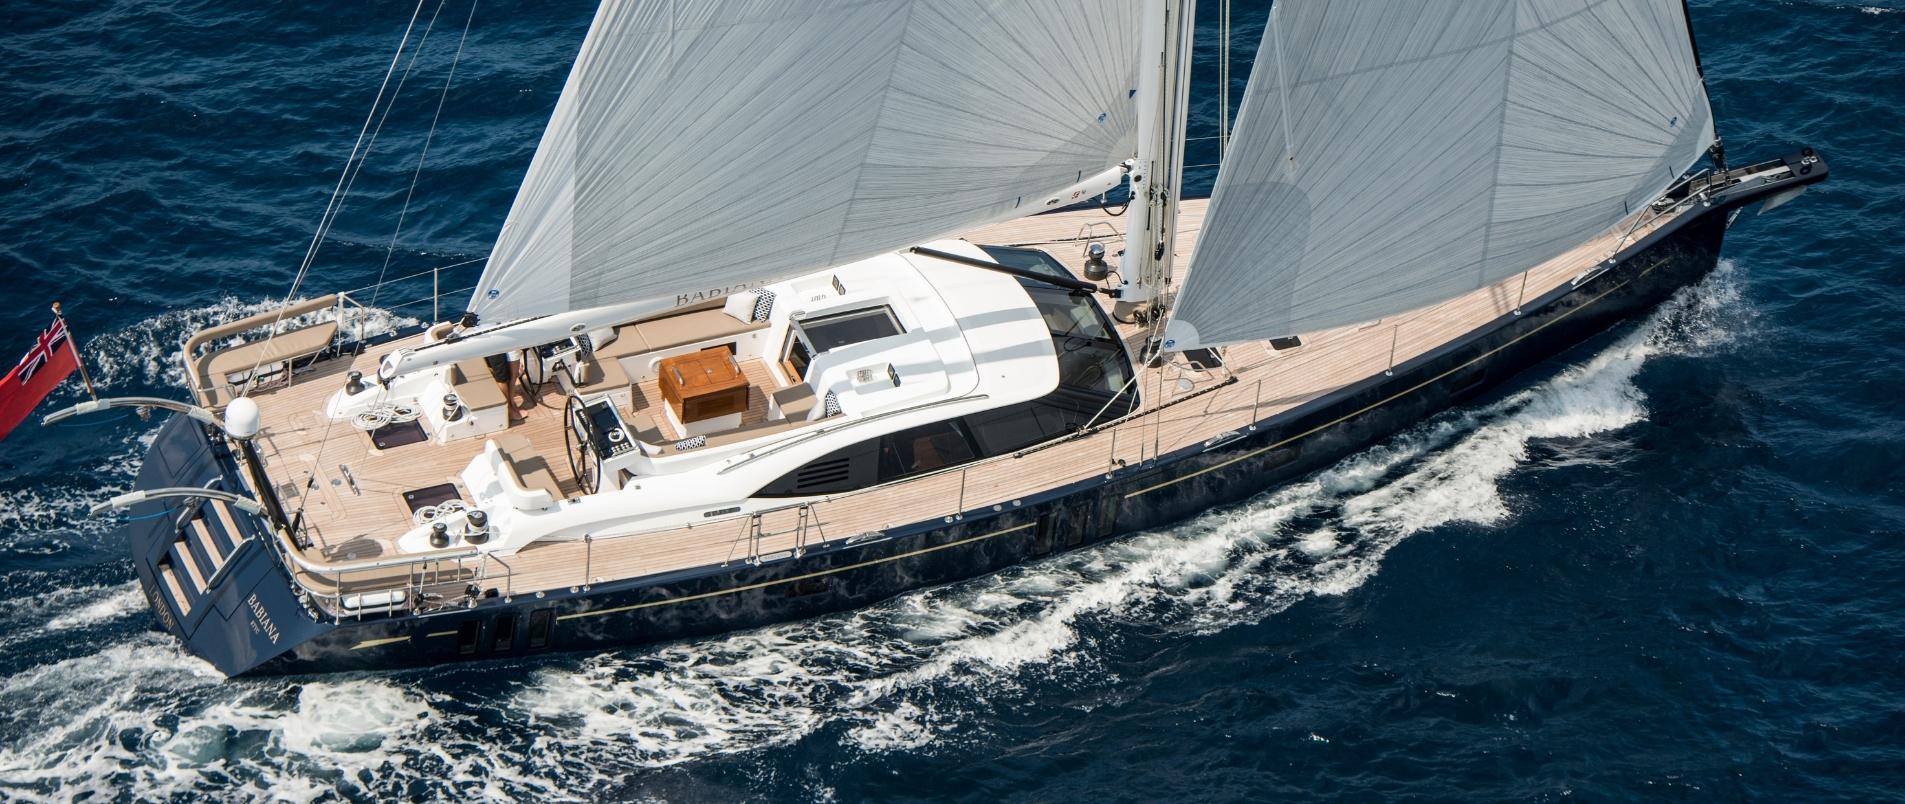 Oyster Luxury Sailing Yachts New Sailboats For Sale Oyster Yachts